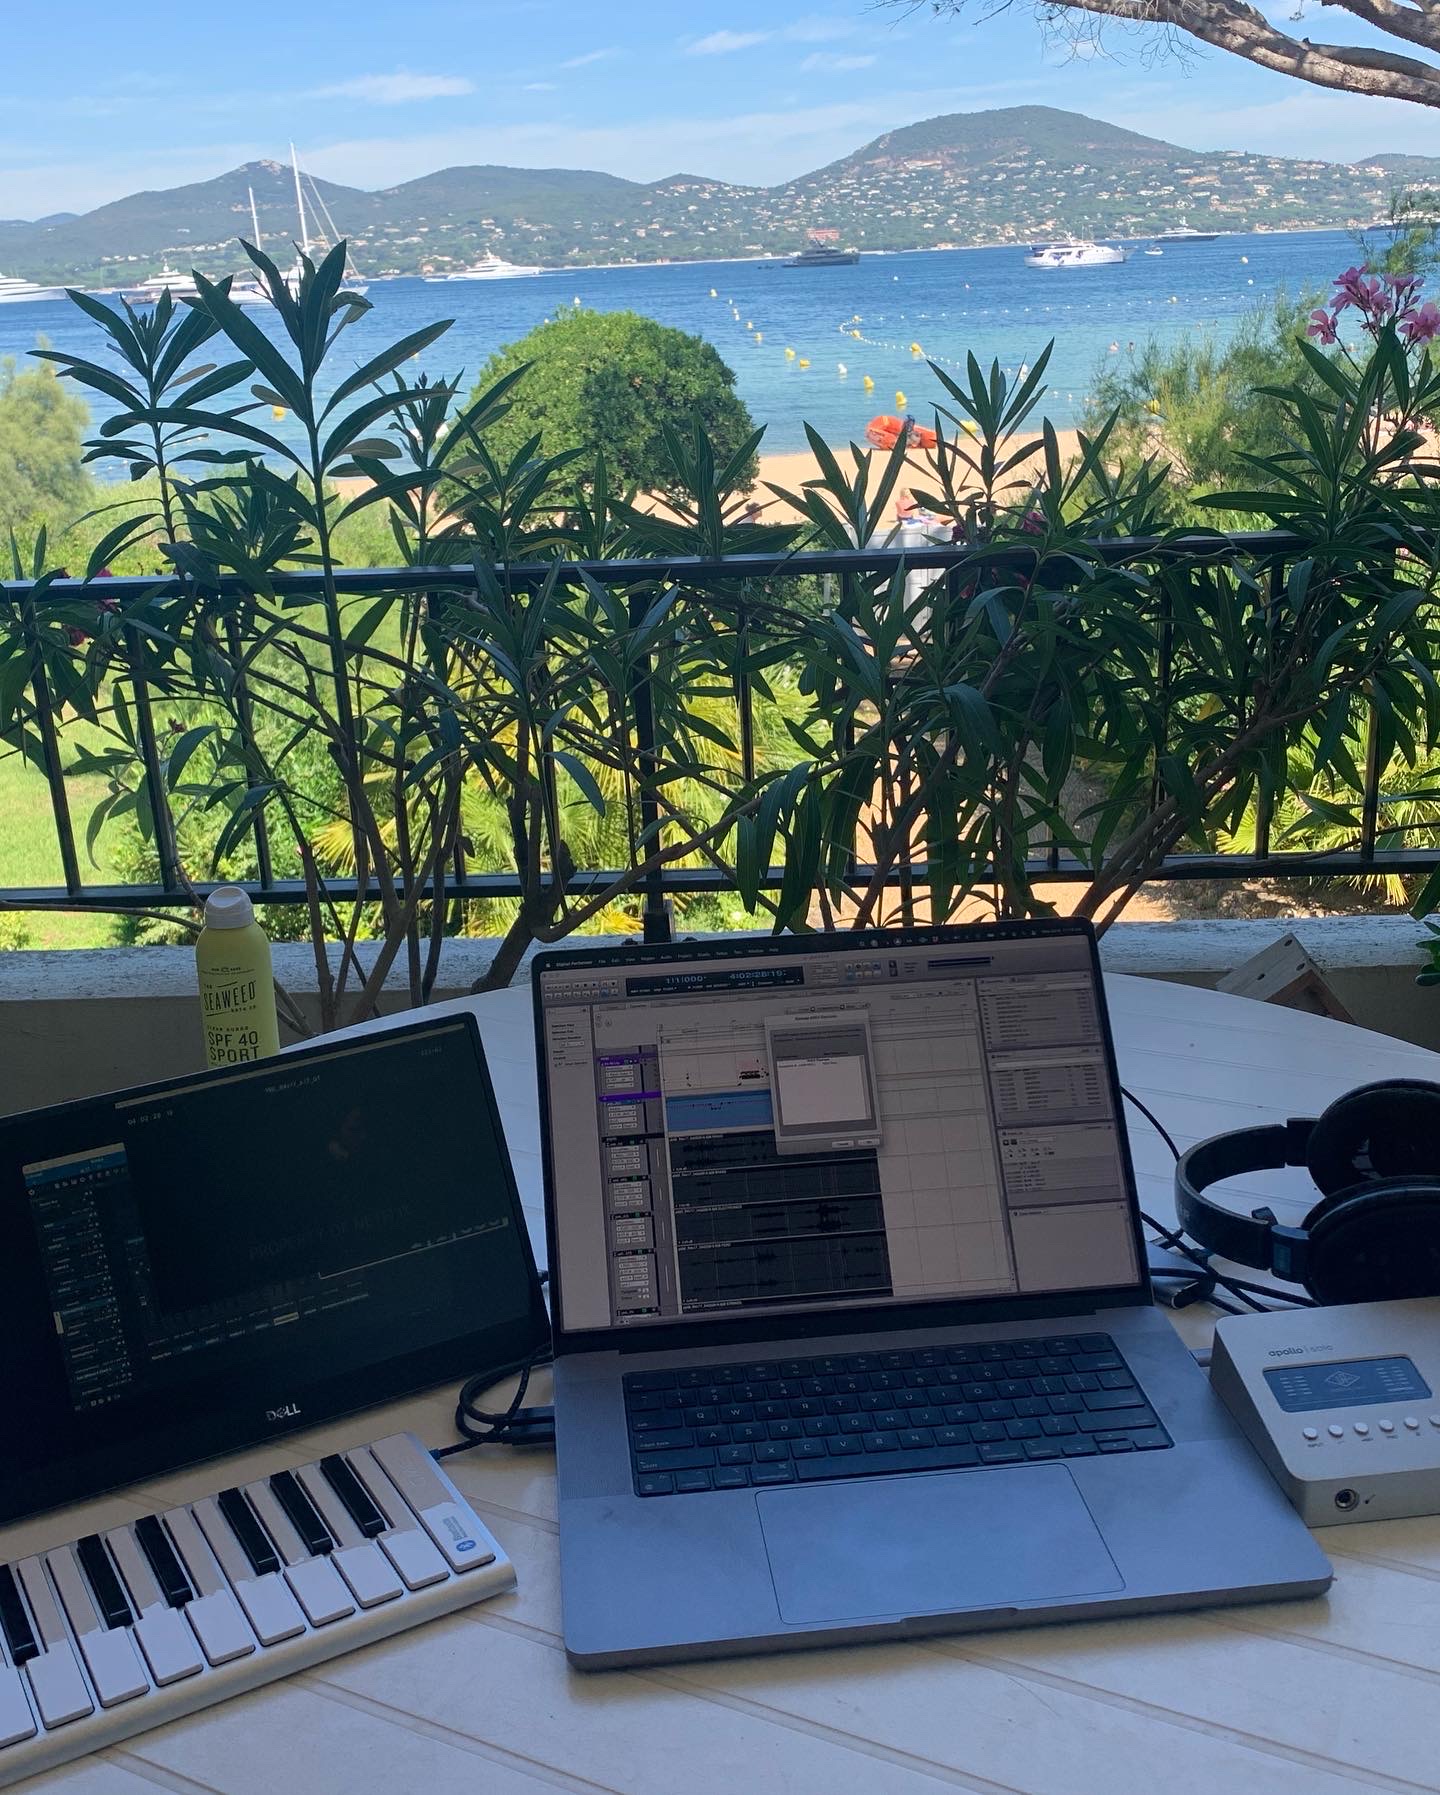 Working, even while on vacation!